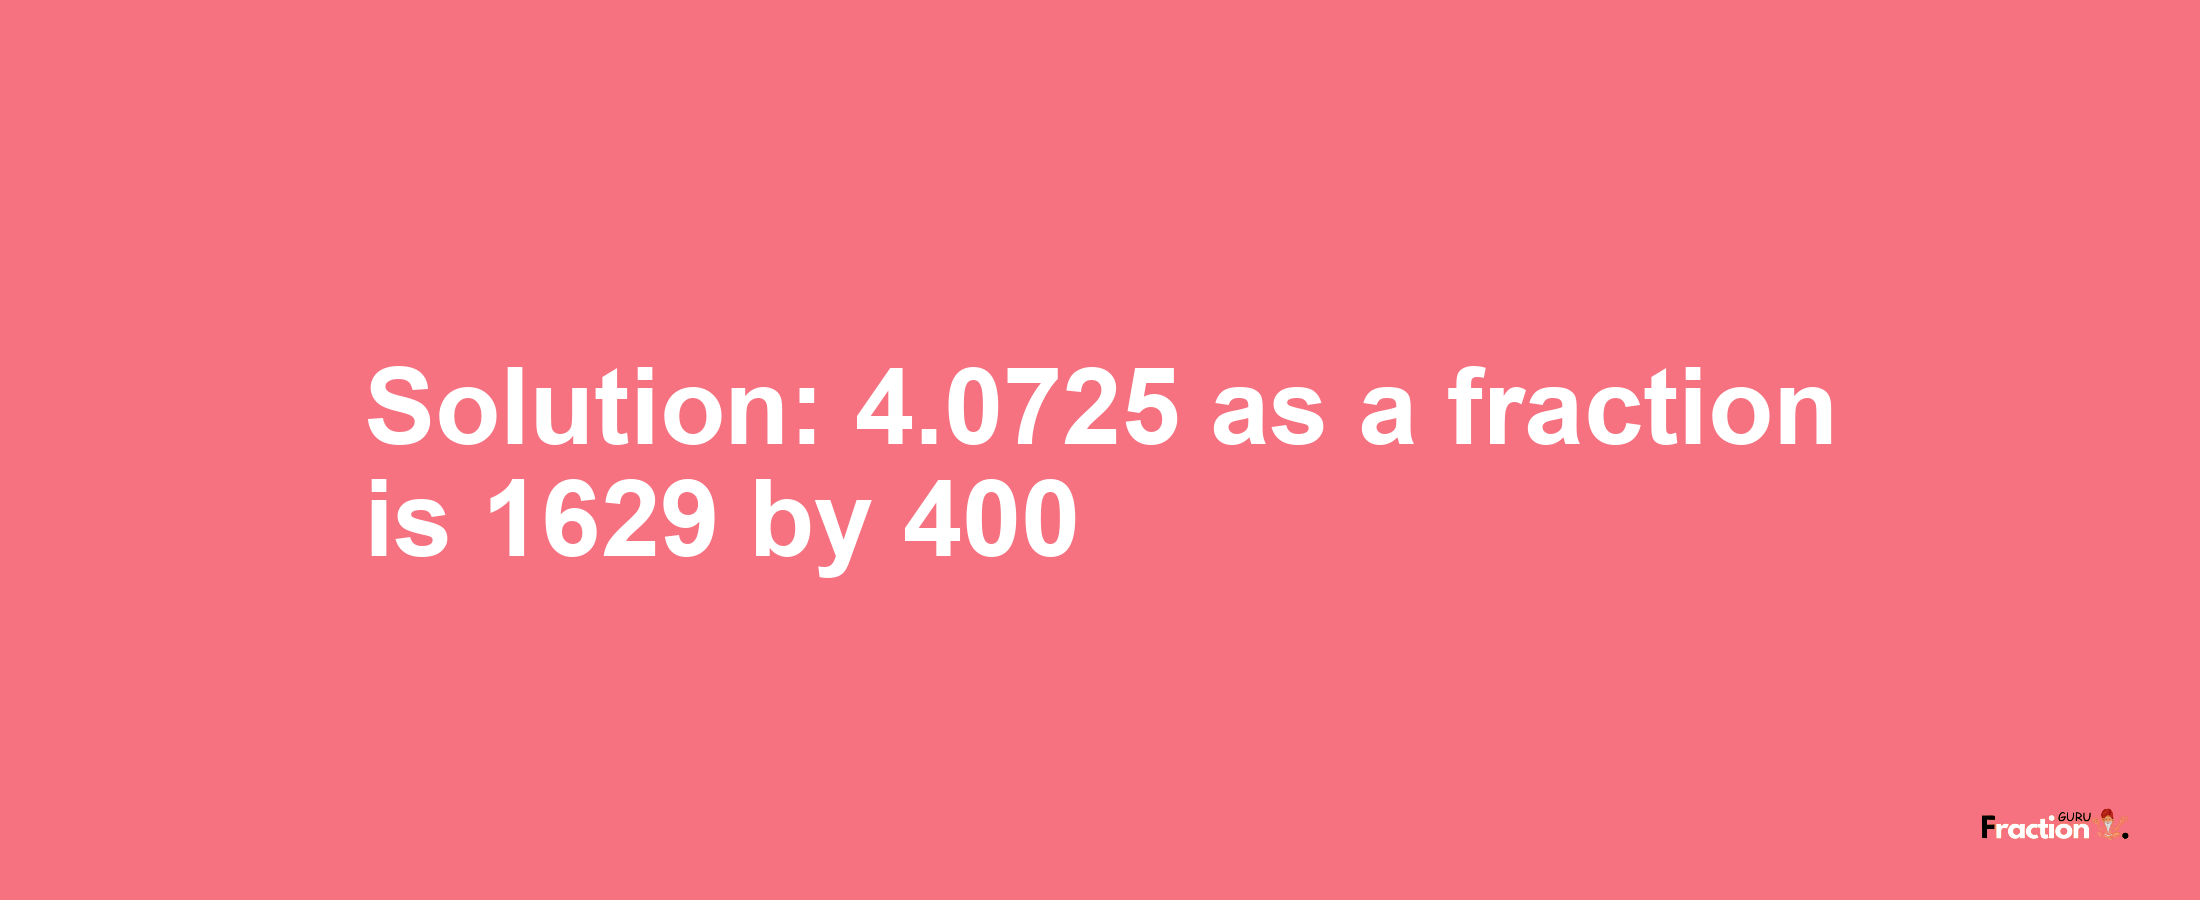 Solution:4.0725 as a fraction is 1629/400